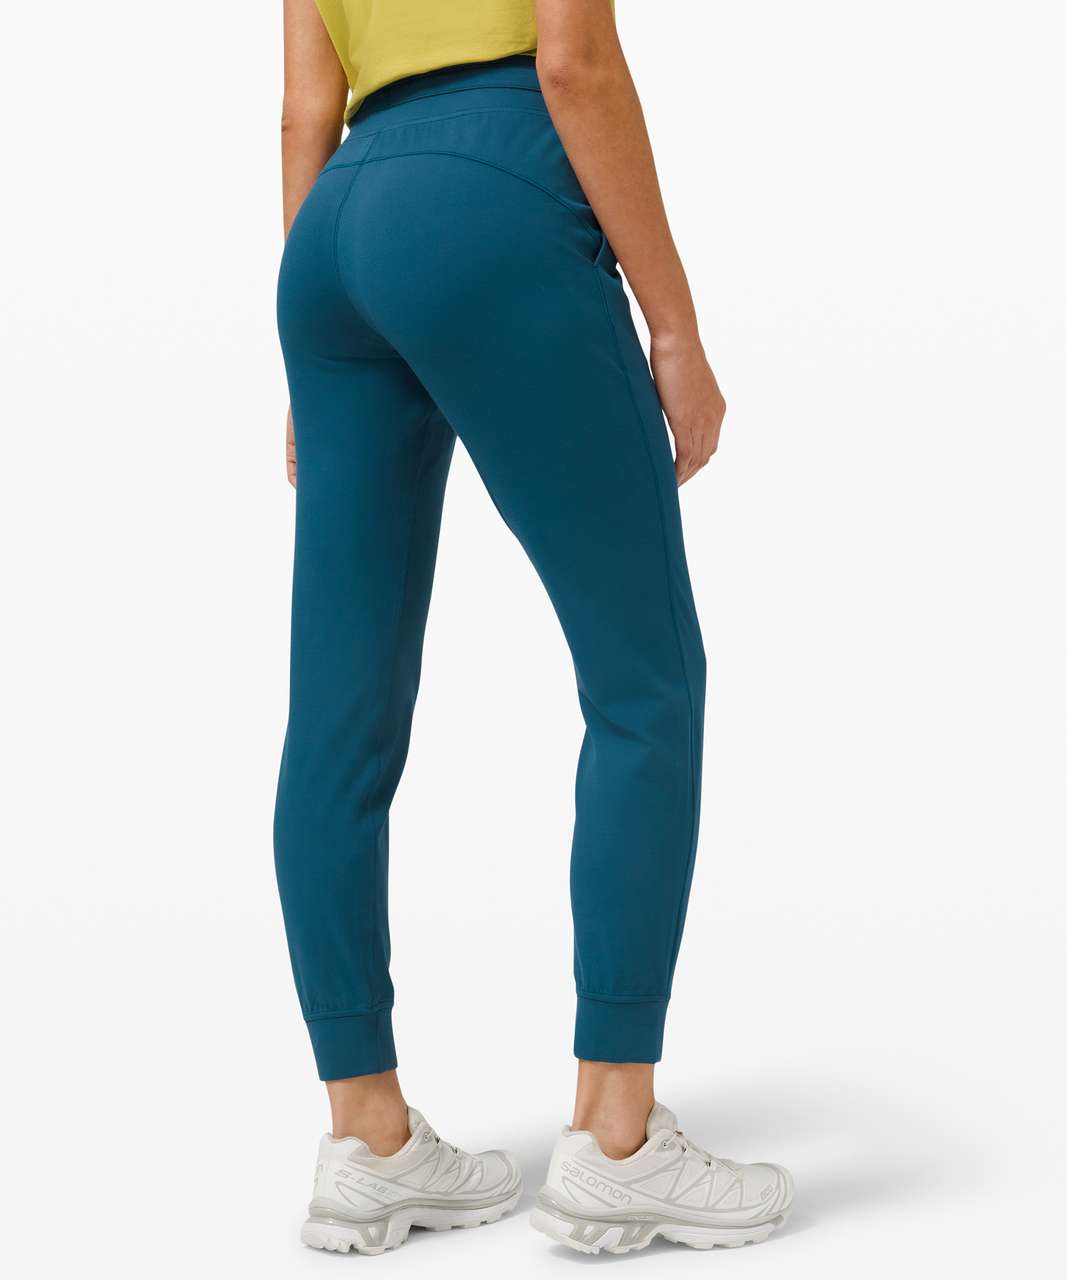 Blue Borealis Lululemon Leggings For Sale In Nc  International Society of  Precision Agriculture